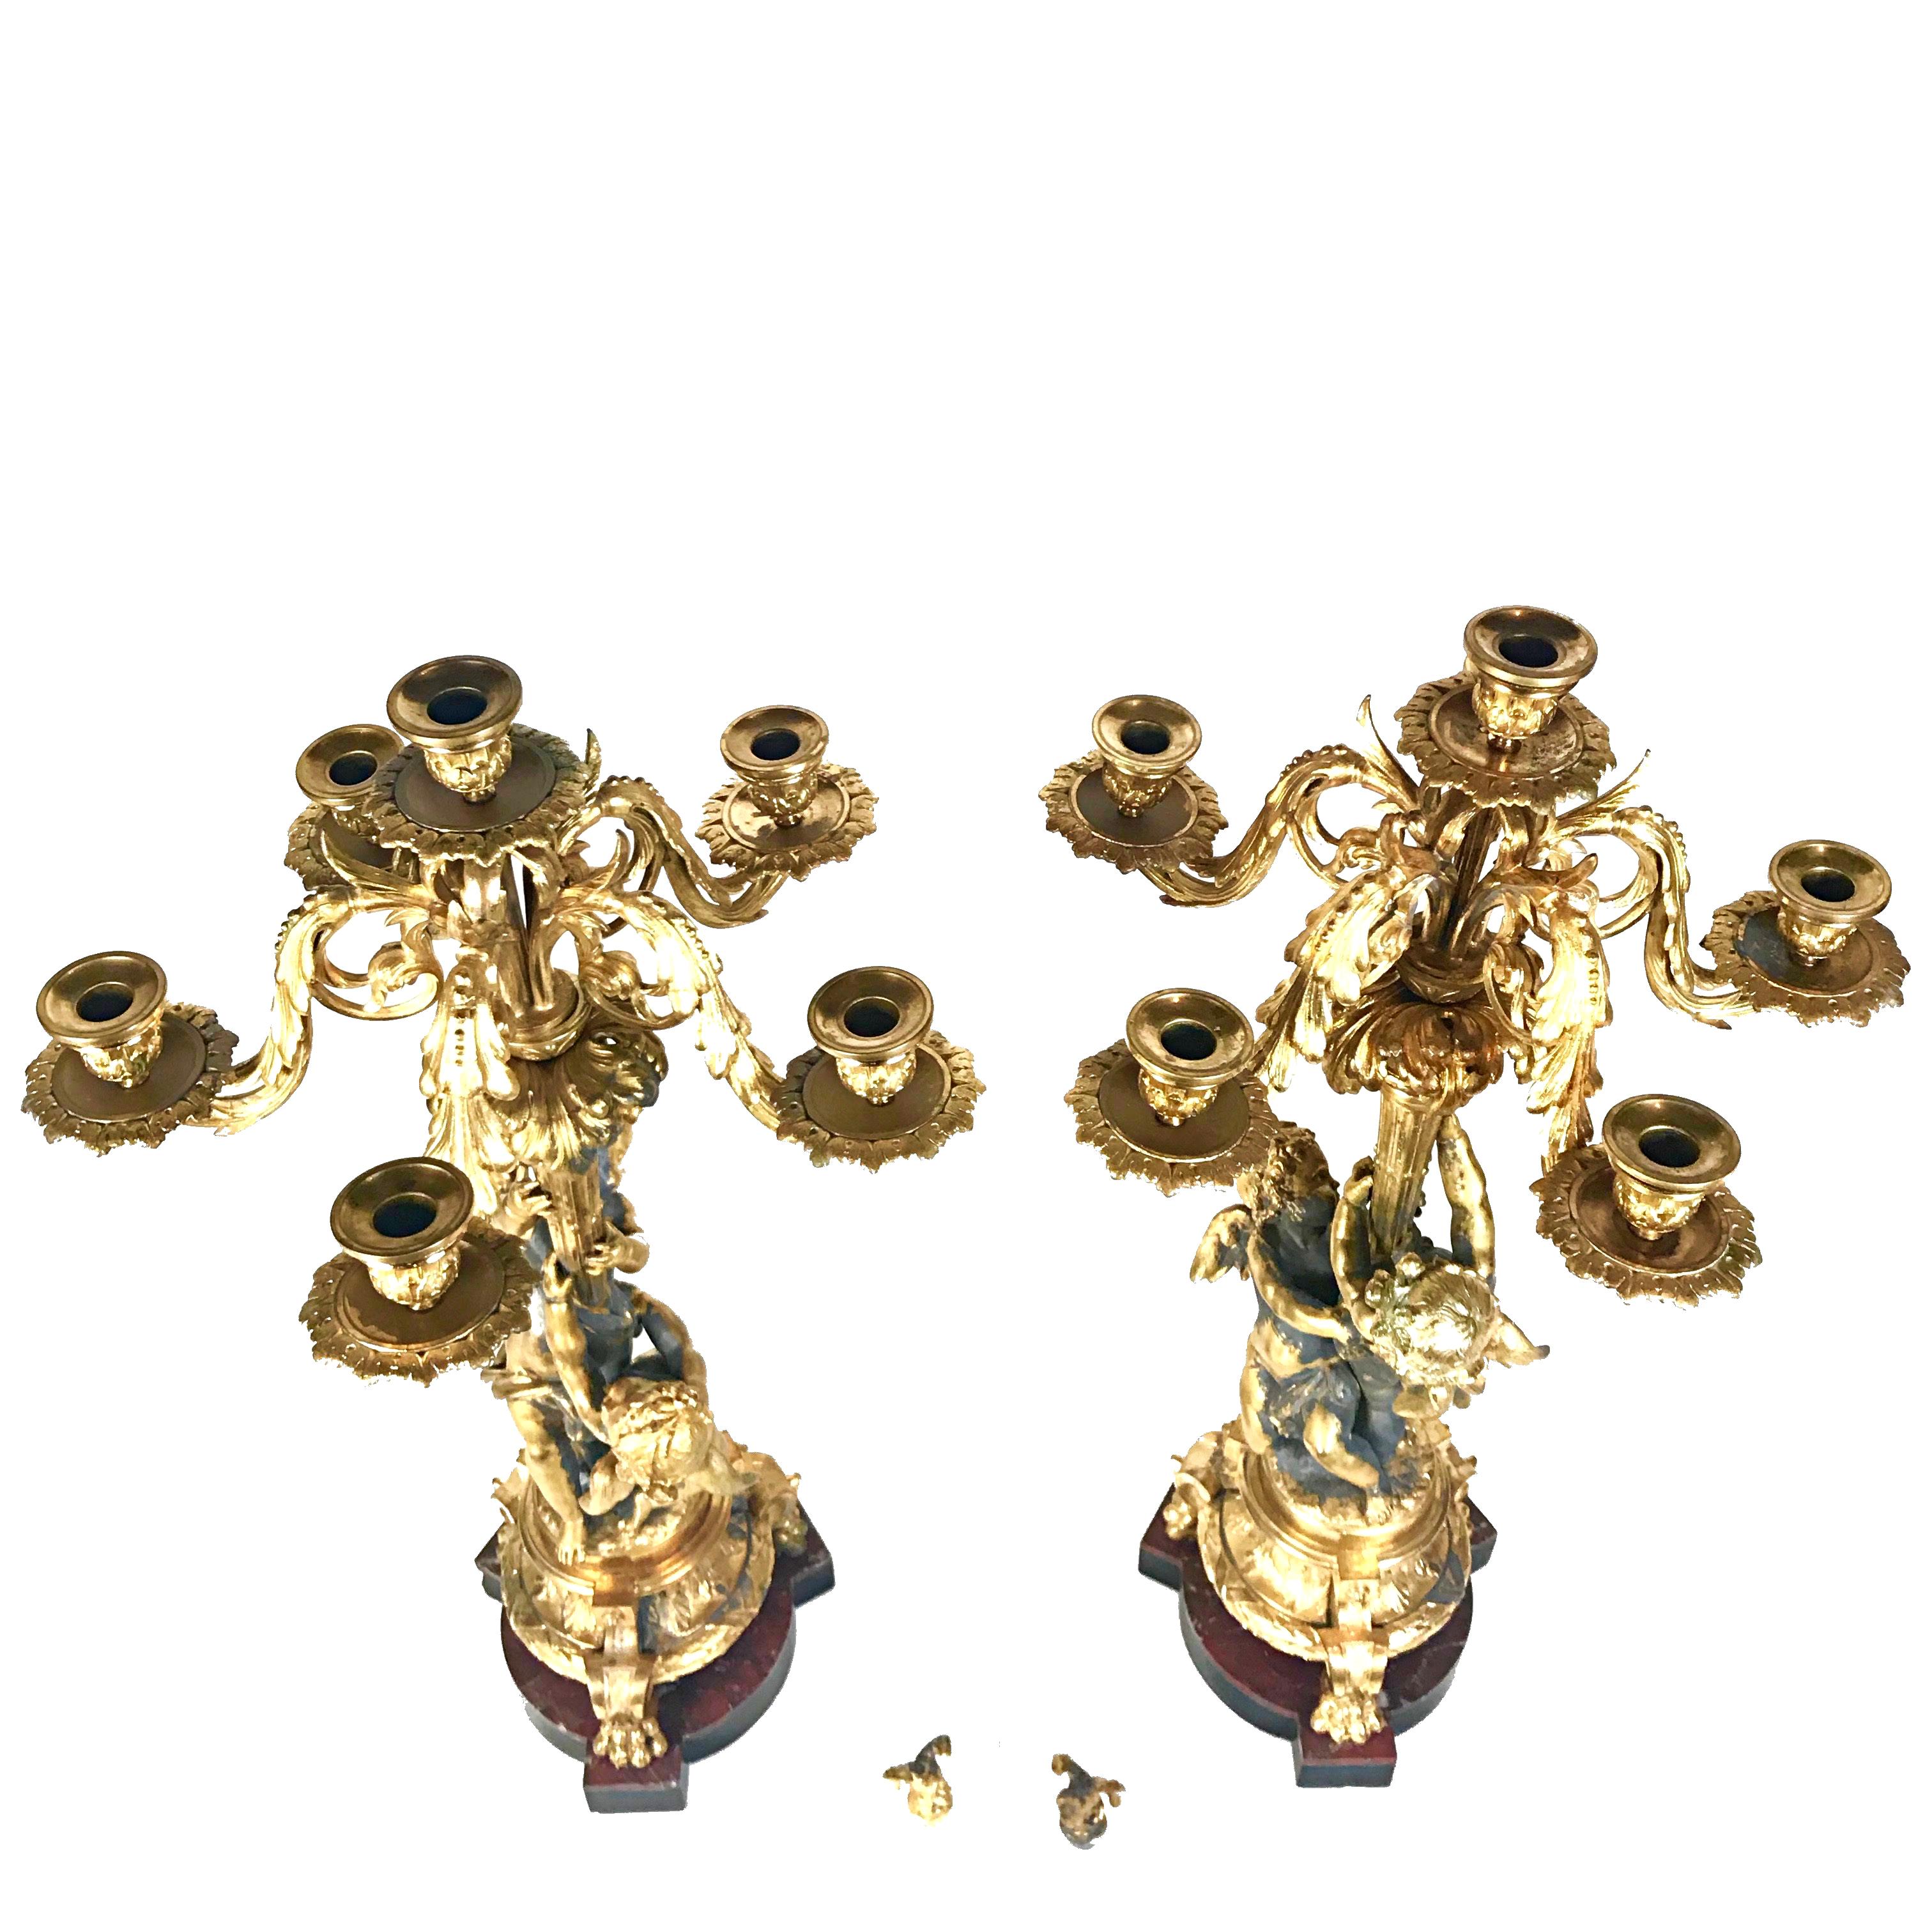 Pair Huge 19th Century Philippe Mourey Ormolu Putti Candelabras, 1870s, France For Sale 13